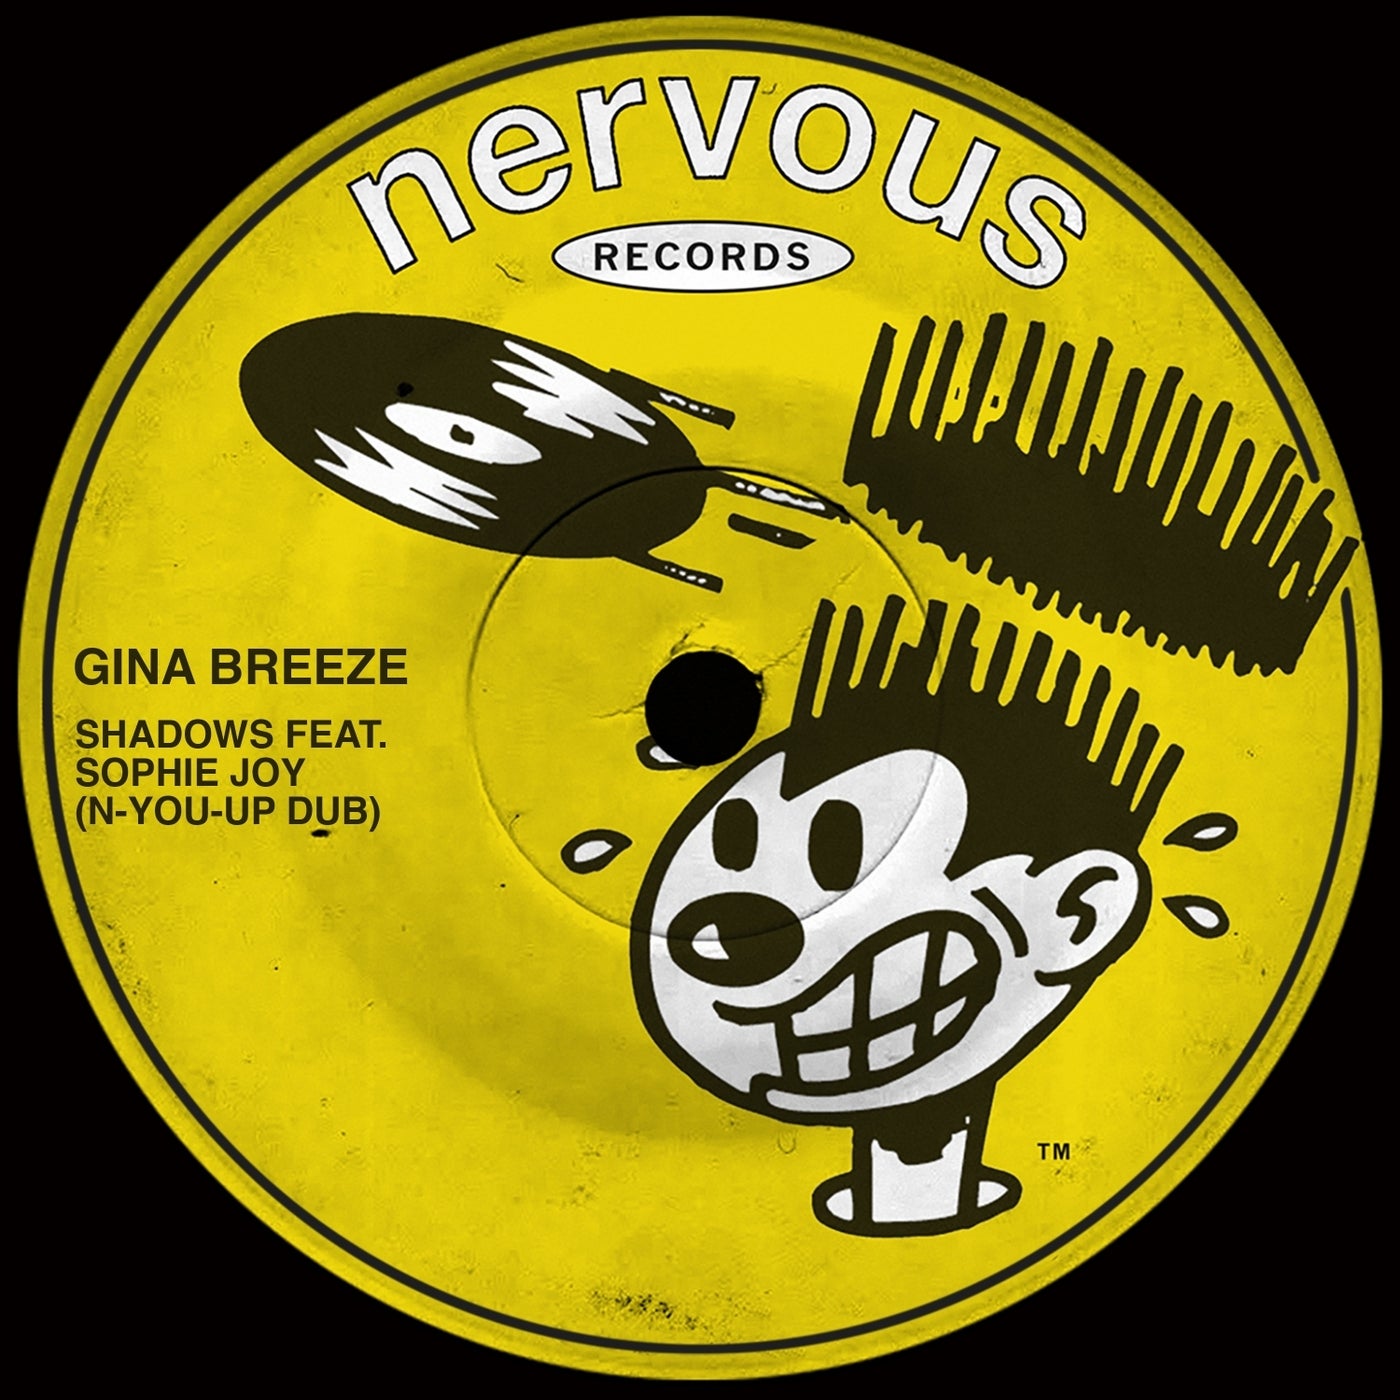 image cover: Gina Breeze, Sophie Joy - Shadows feat. Sophie Joy (N-You-Up Dub) on Nervous Records